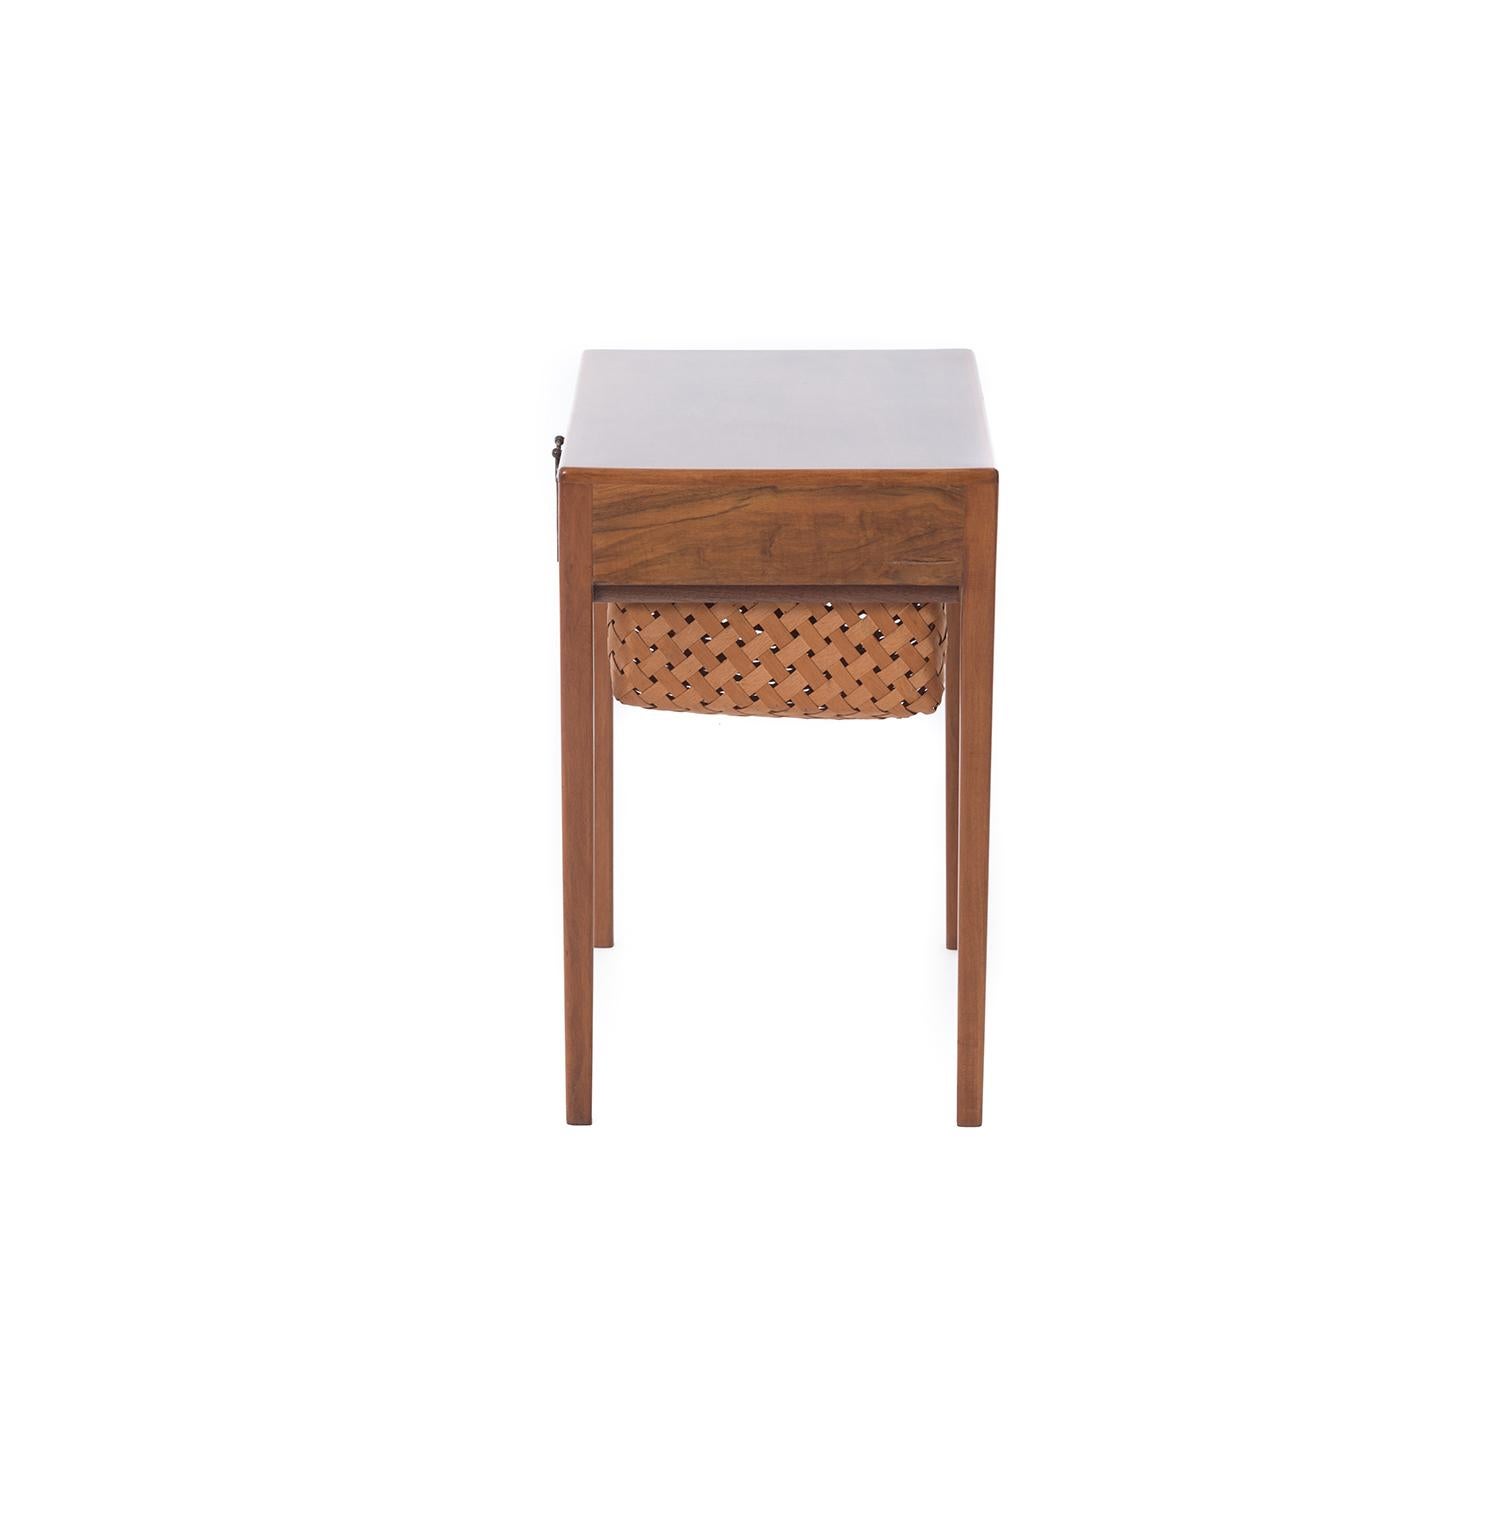 Danish Transitional Scandinavian Modern Mahogany Sewing Table with Drawer and Basket